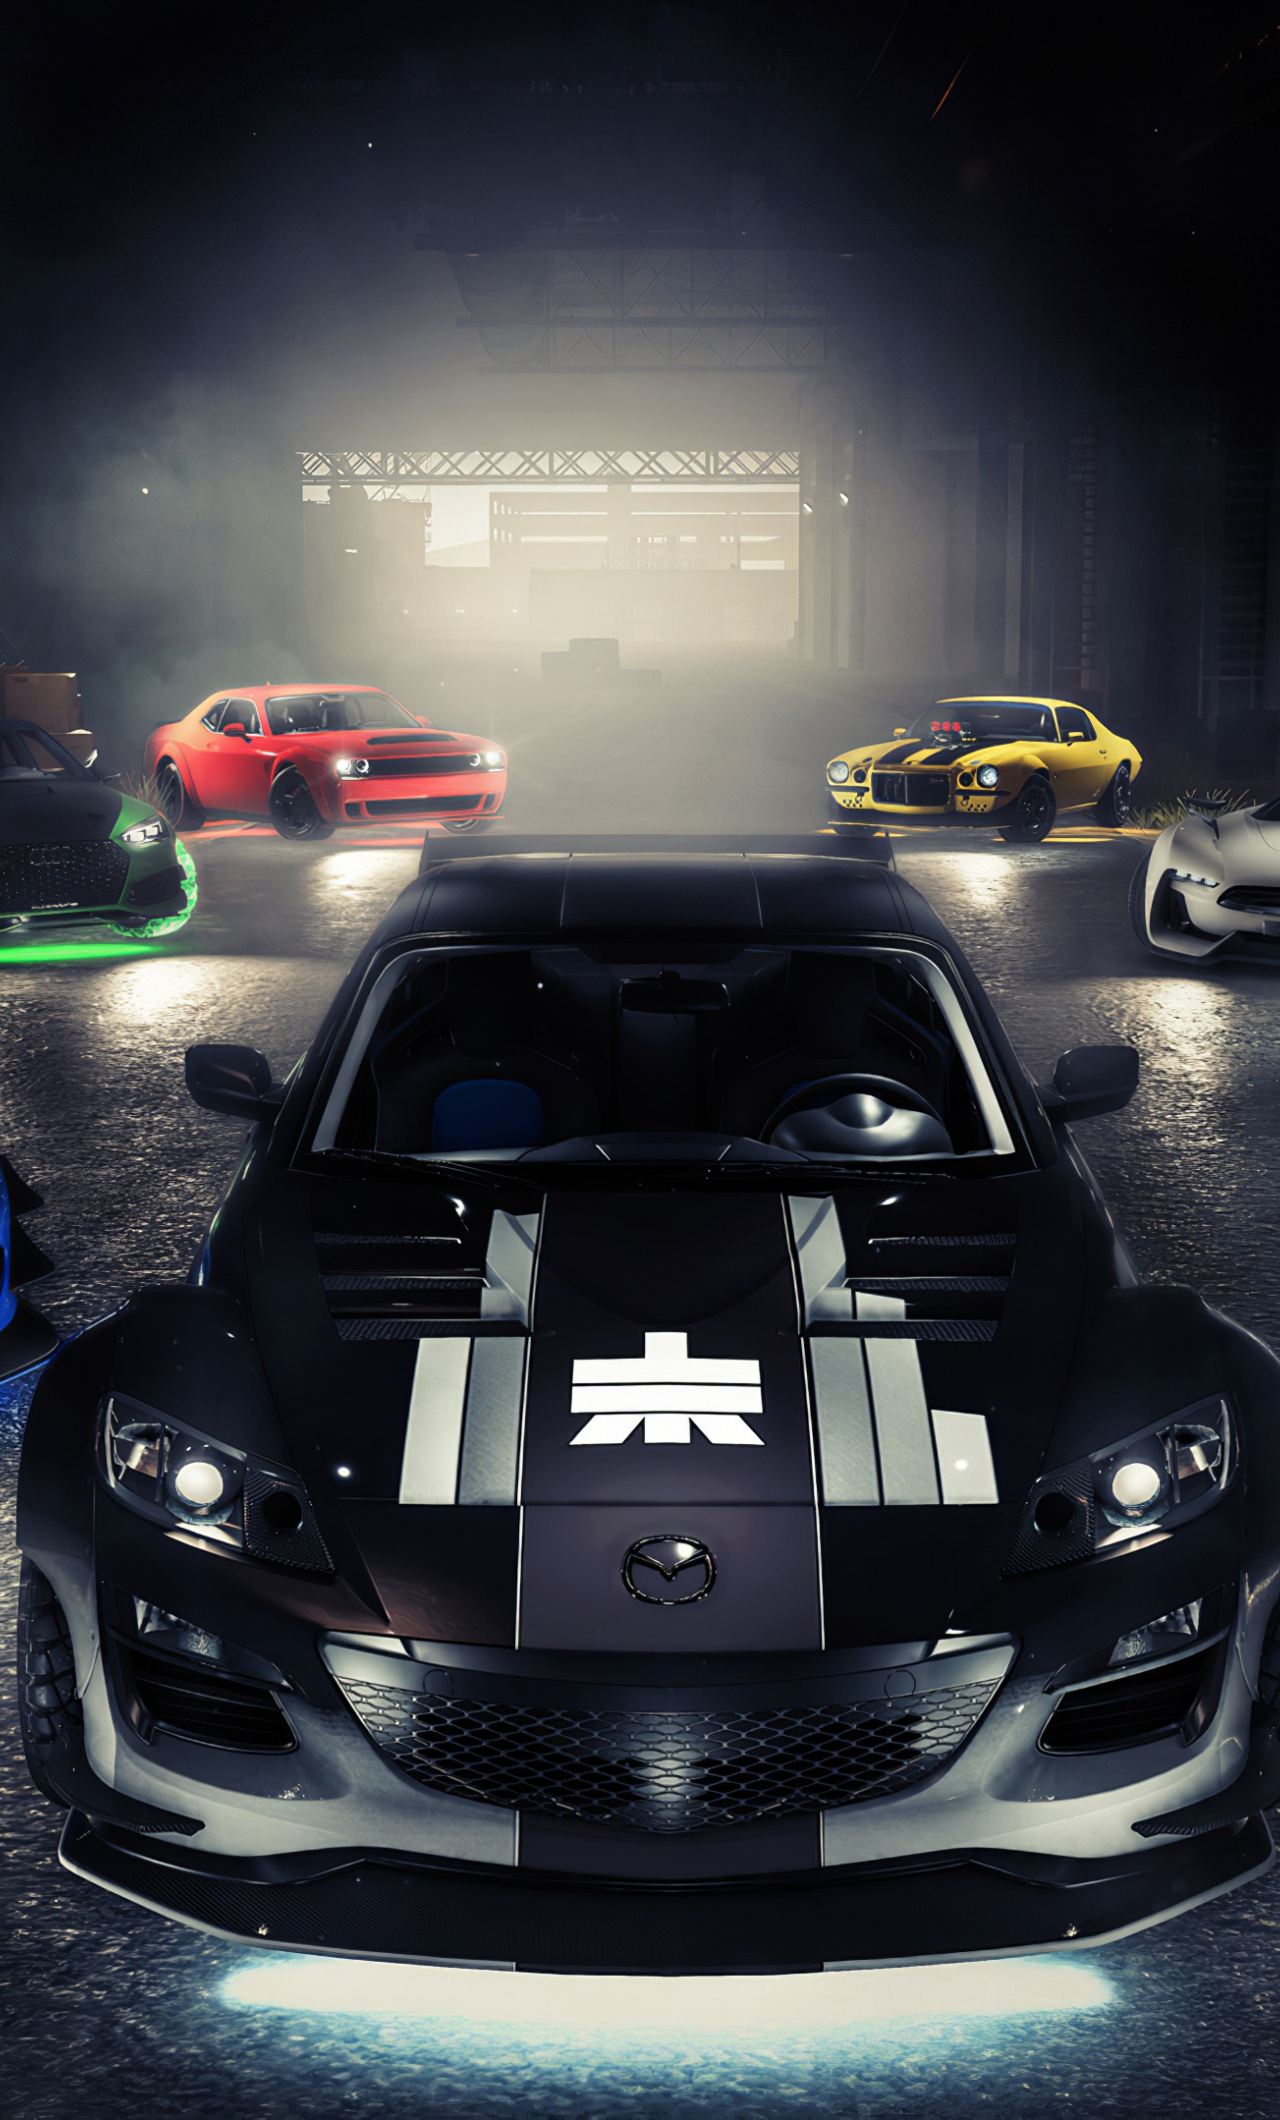 Download Game, video game, race cars, cars, The Crew 2 wallpaper, 1280x iPhone 6 Plus